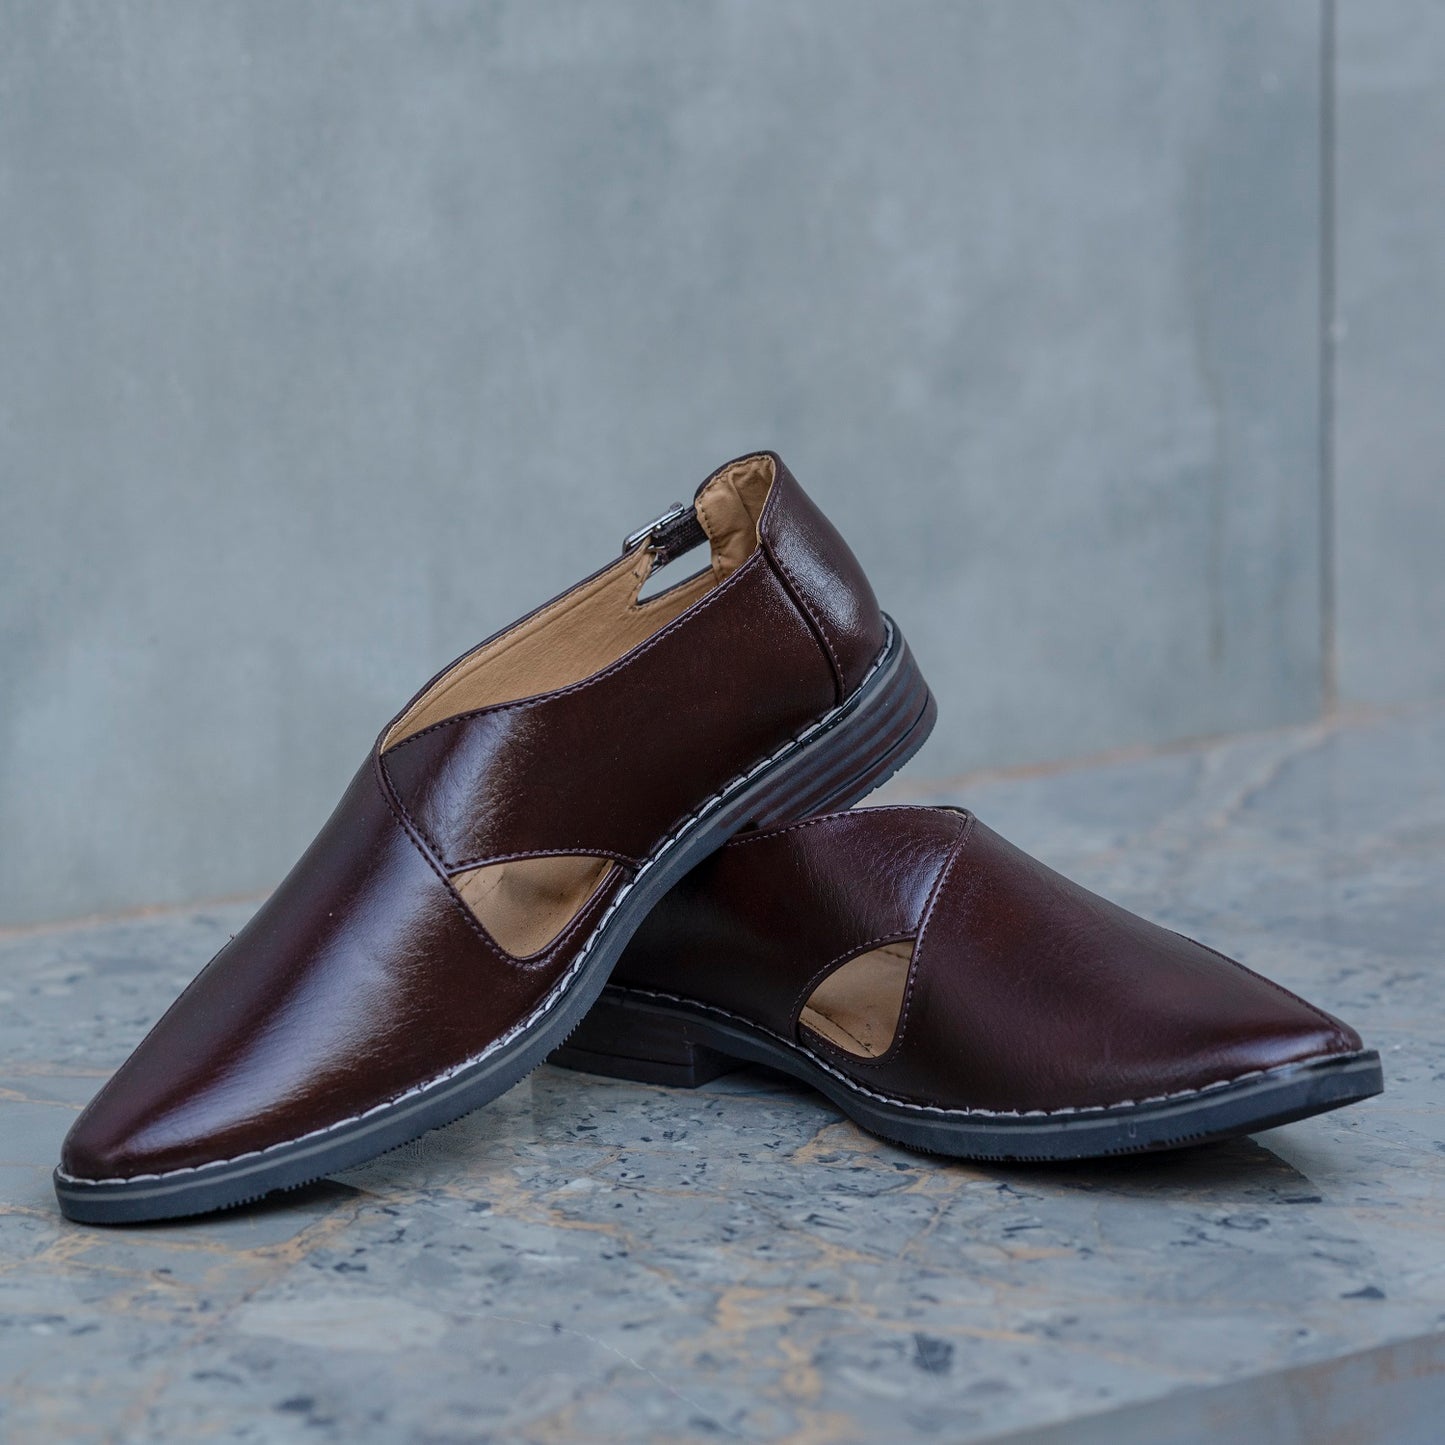 The Aurous Handcrafted Criss Cross Formal Peshawari Shoes - Brown